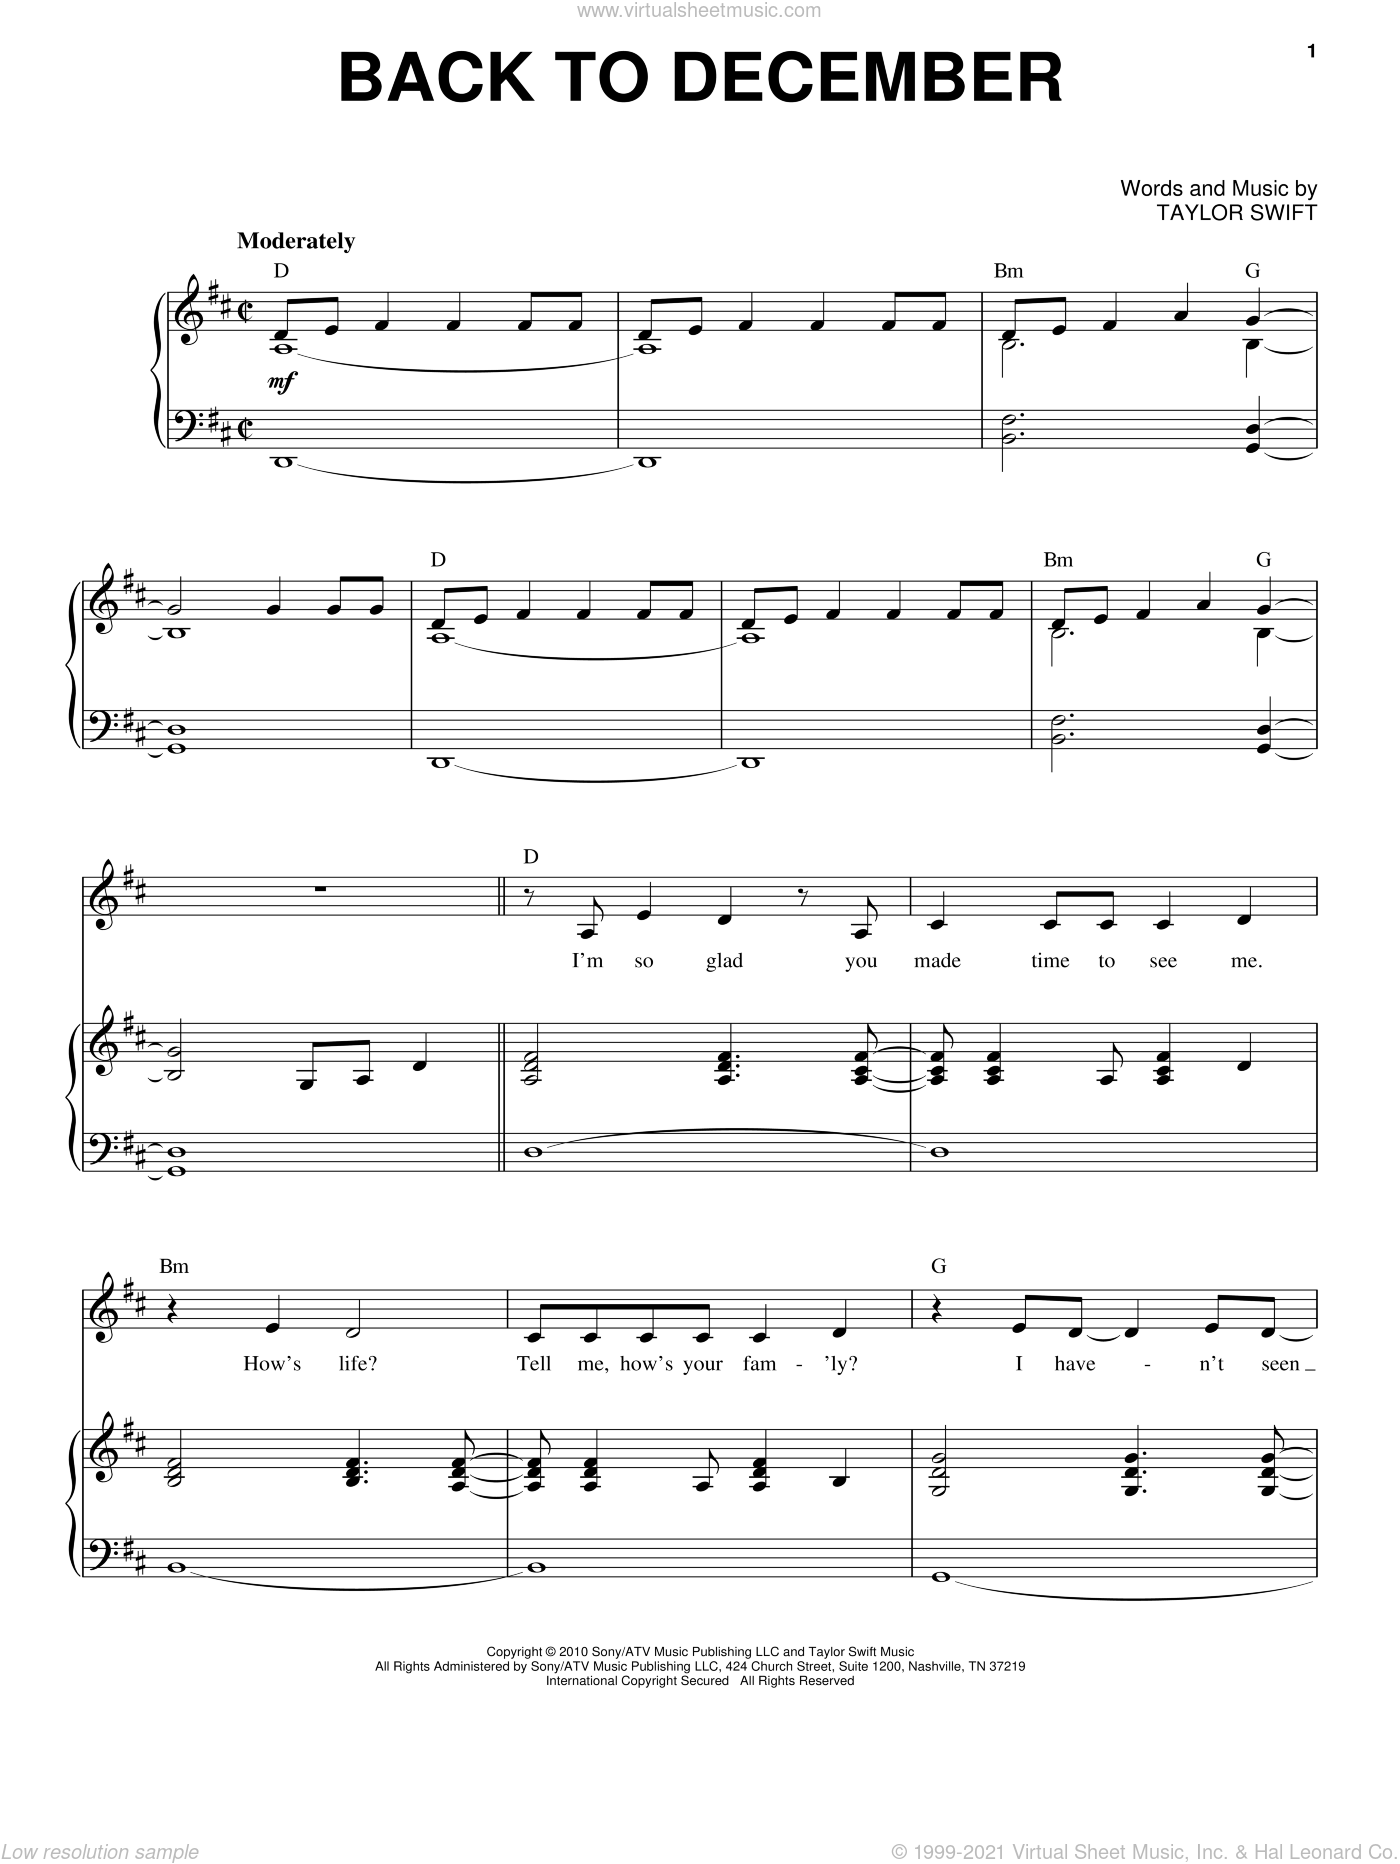 Swift - Back To December sheet music for voice and piano (PDF)